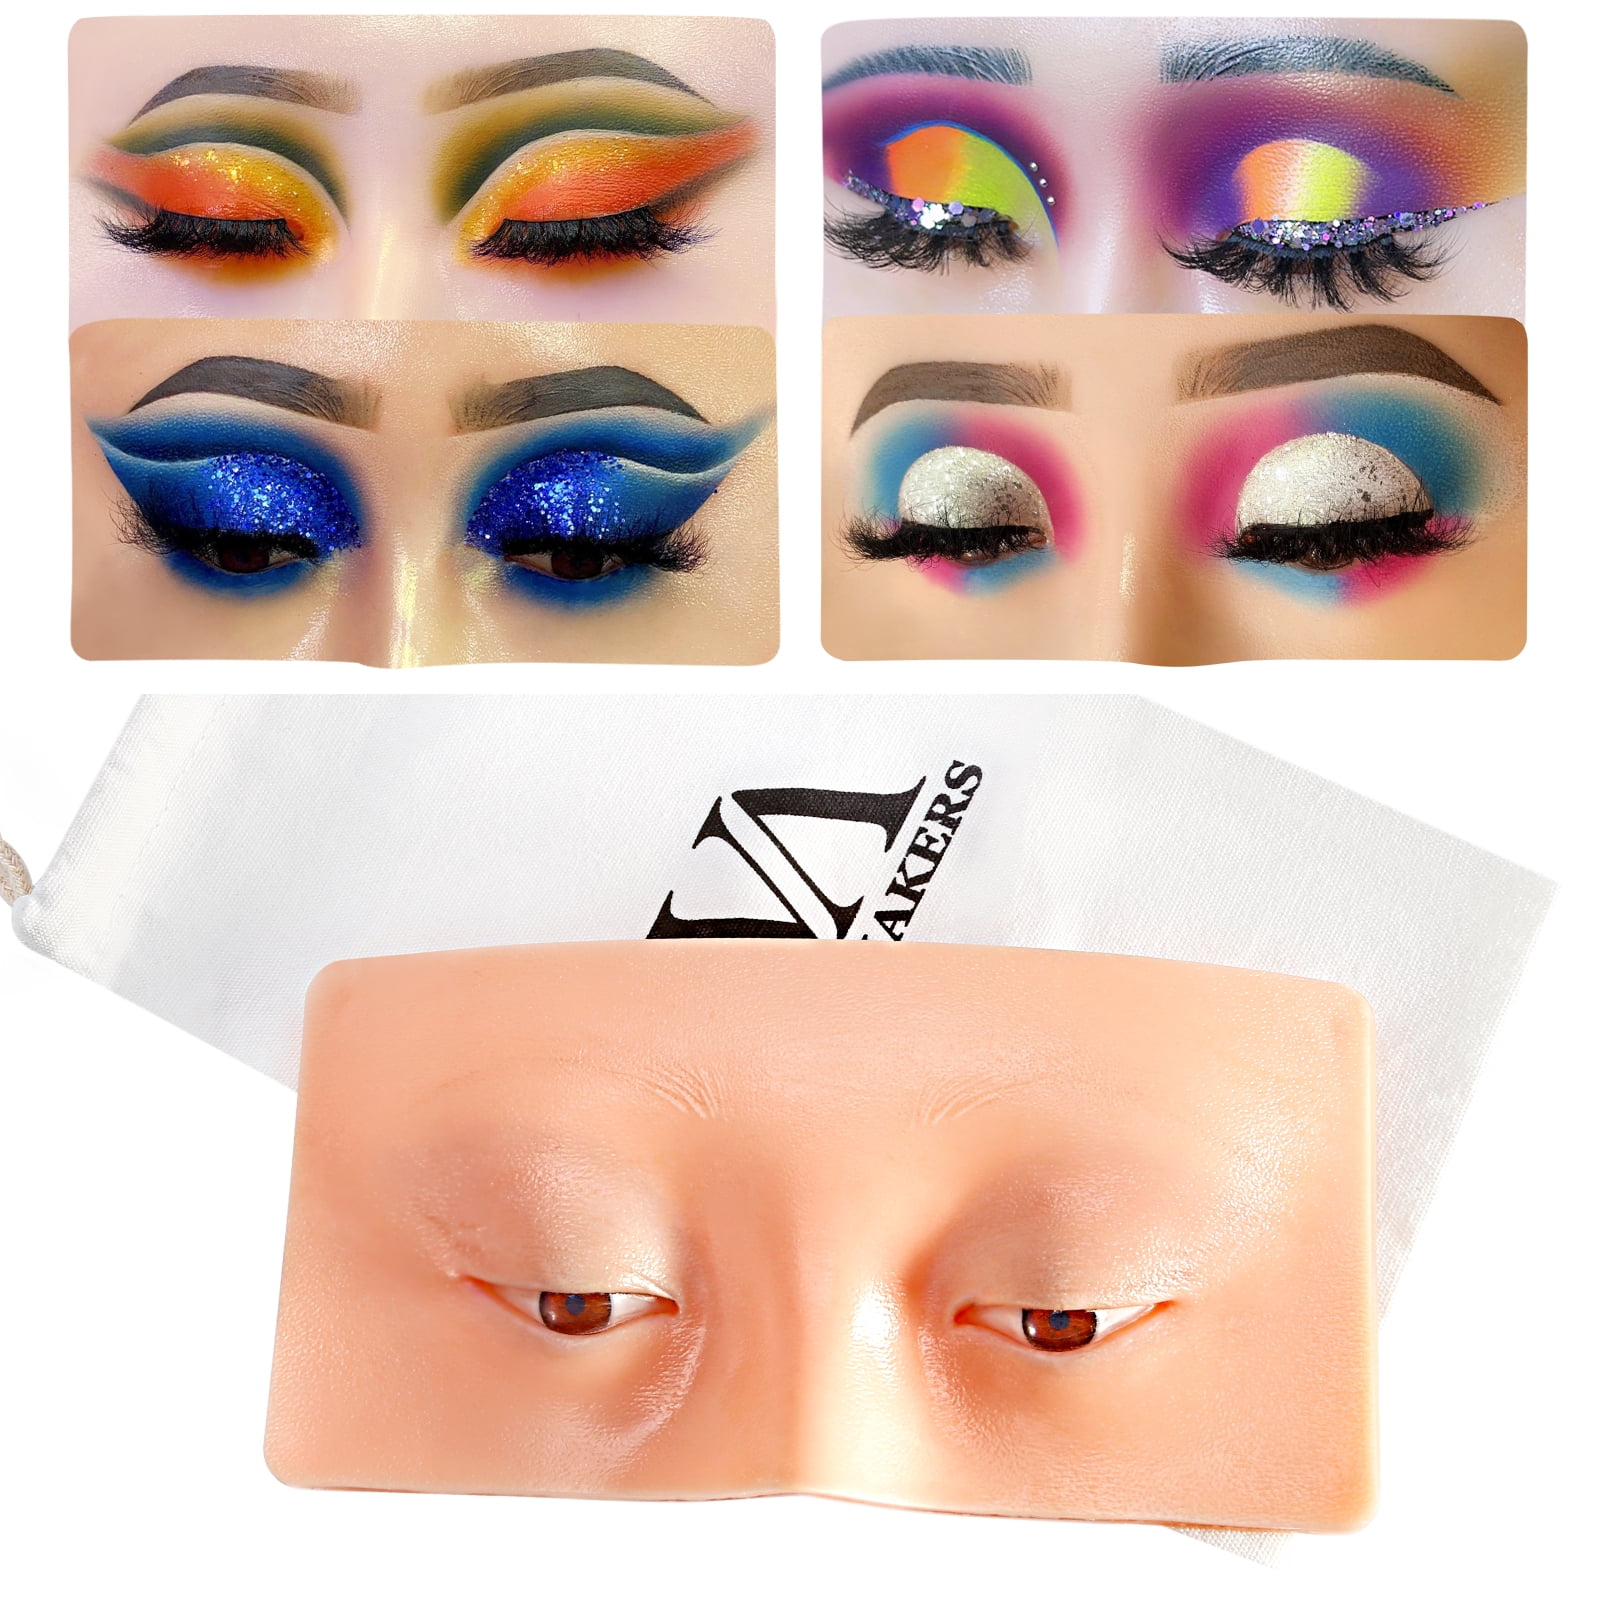 Reusable Practicing Makeup Face Eye Mannequin Makeup Practice Board Pad  Silicone Bionic Skin for Makeup Tools Teaching Supplies